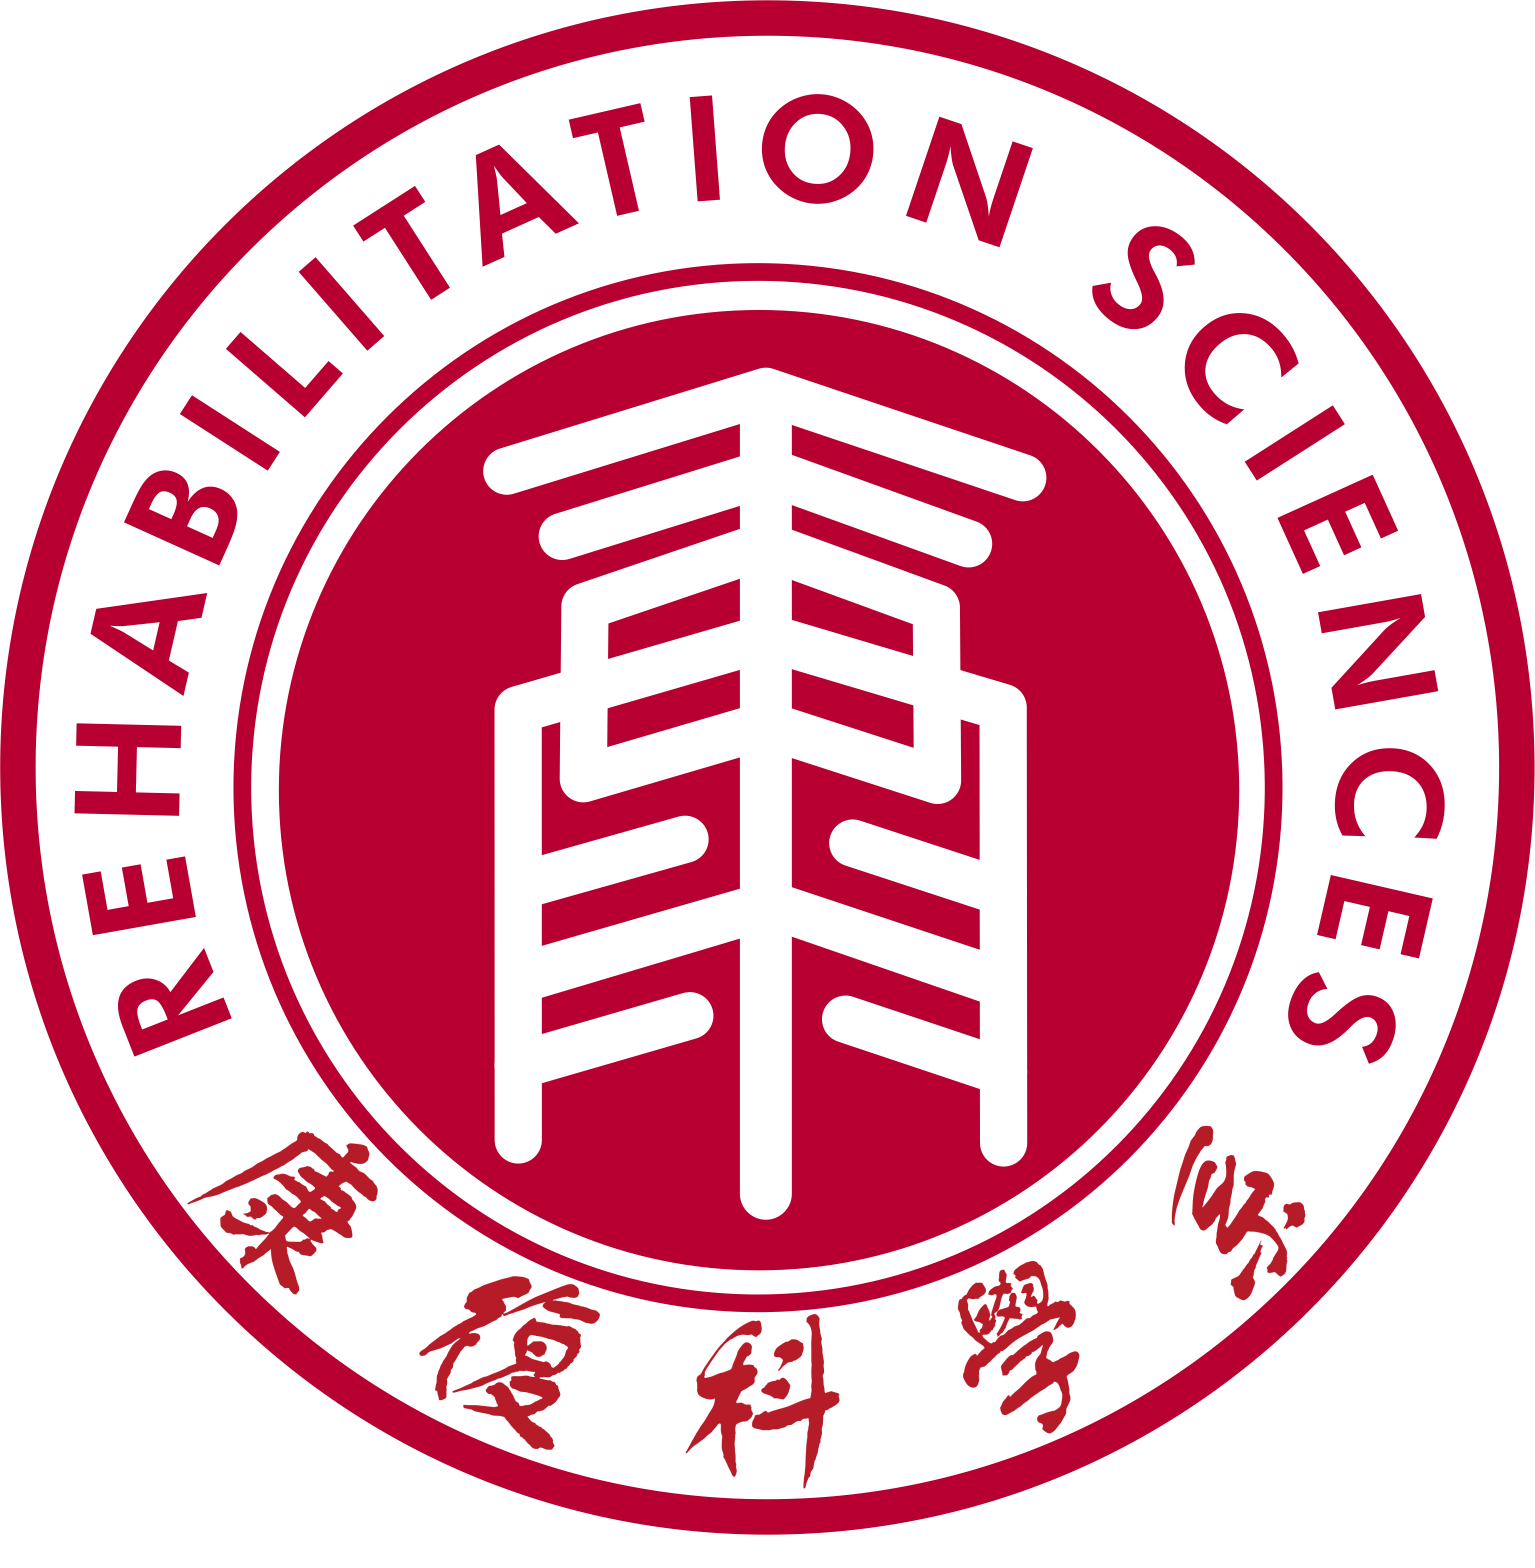 Department of Rehabilitation Sciences, Faculty of Eudcation,East China Normal University